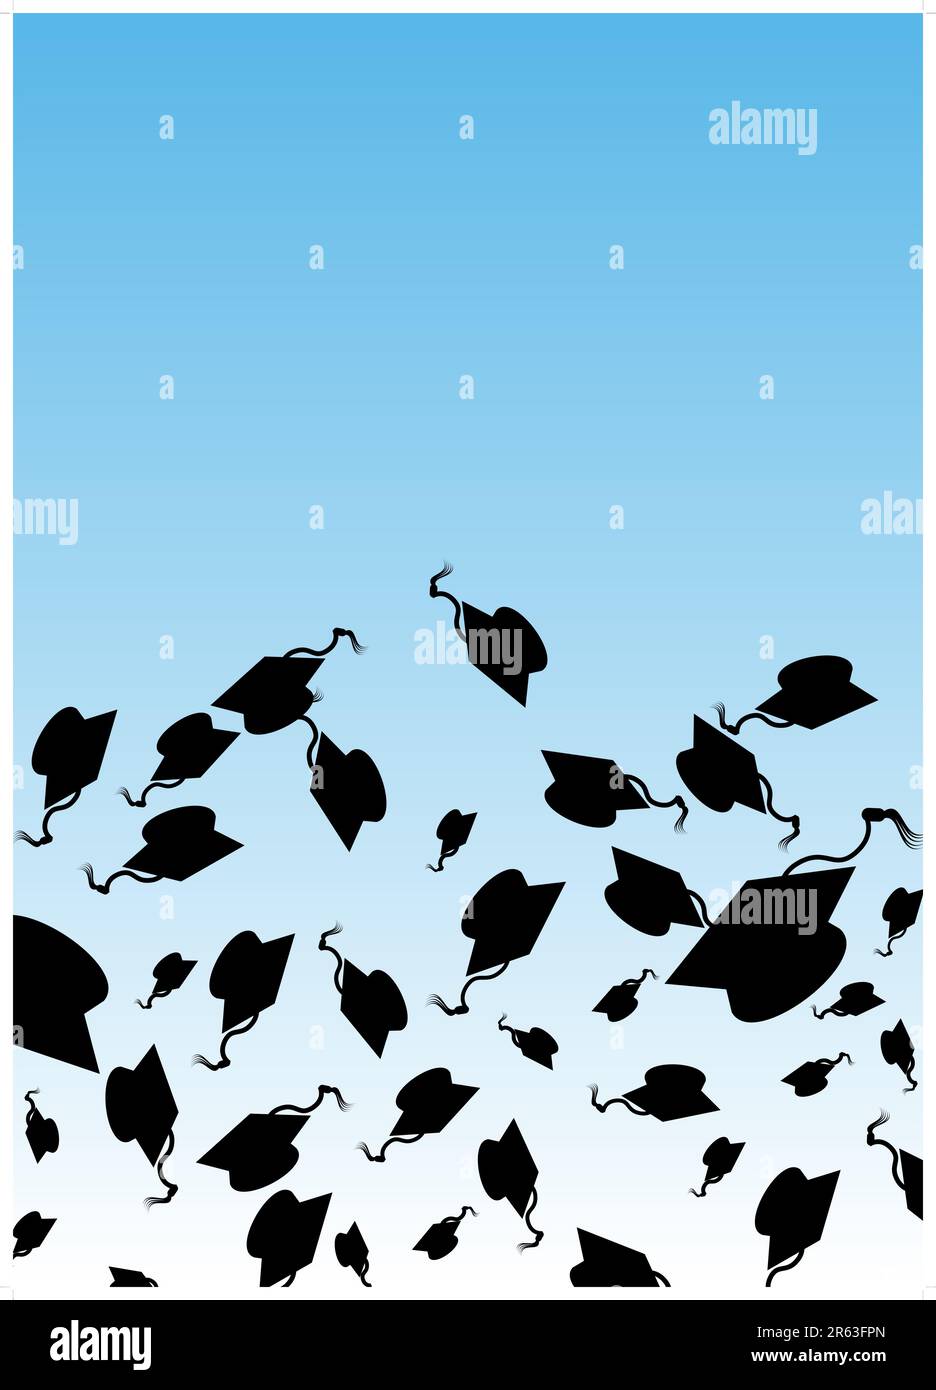 An image of graduation hats being tossed. Stock Vector